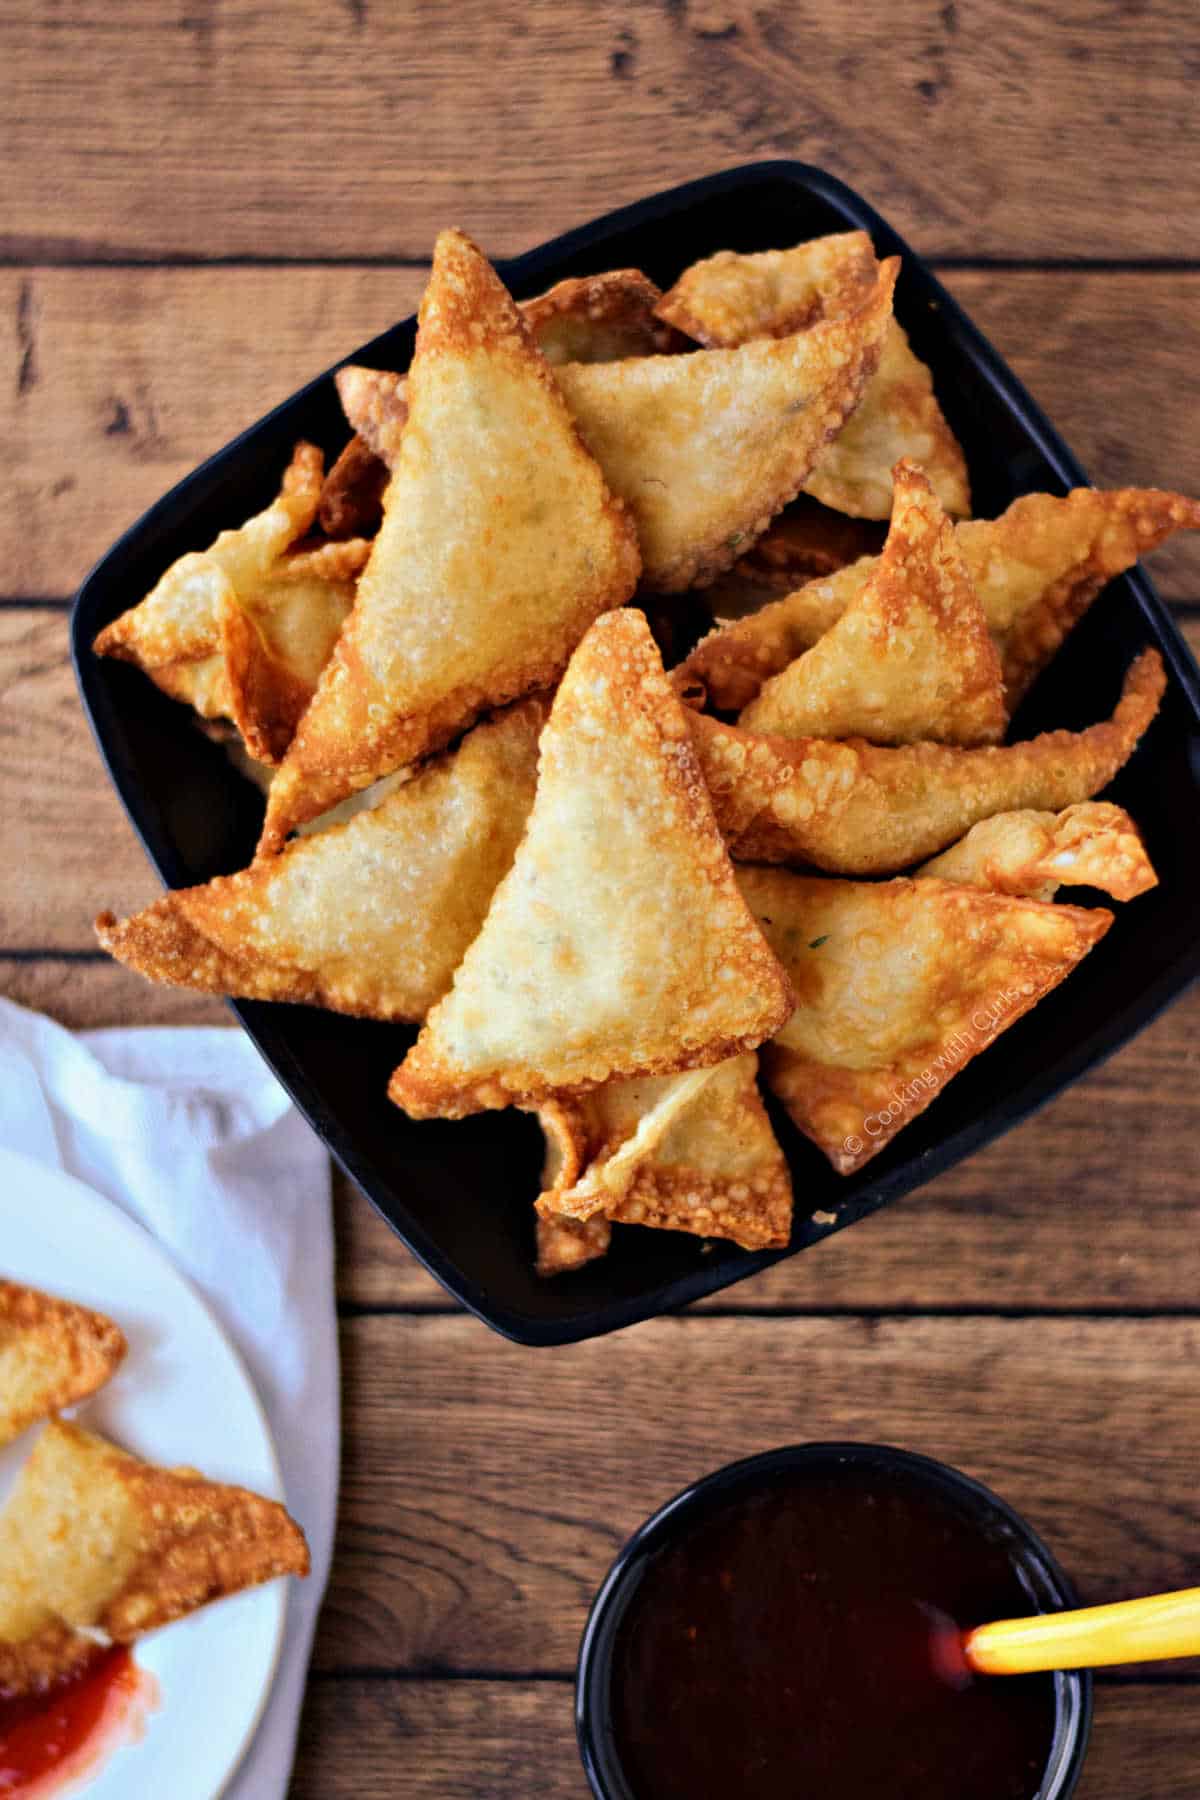 Crab rangoons in a bowl with a small bowl of sweet and sour on the side.